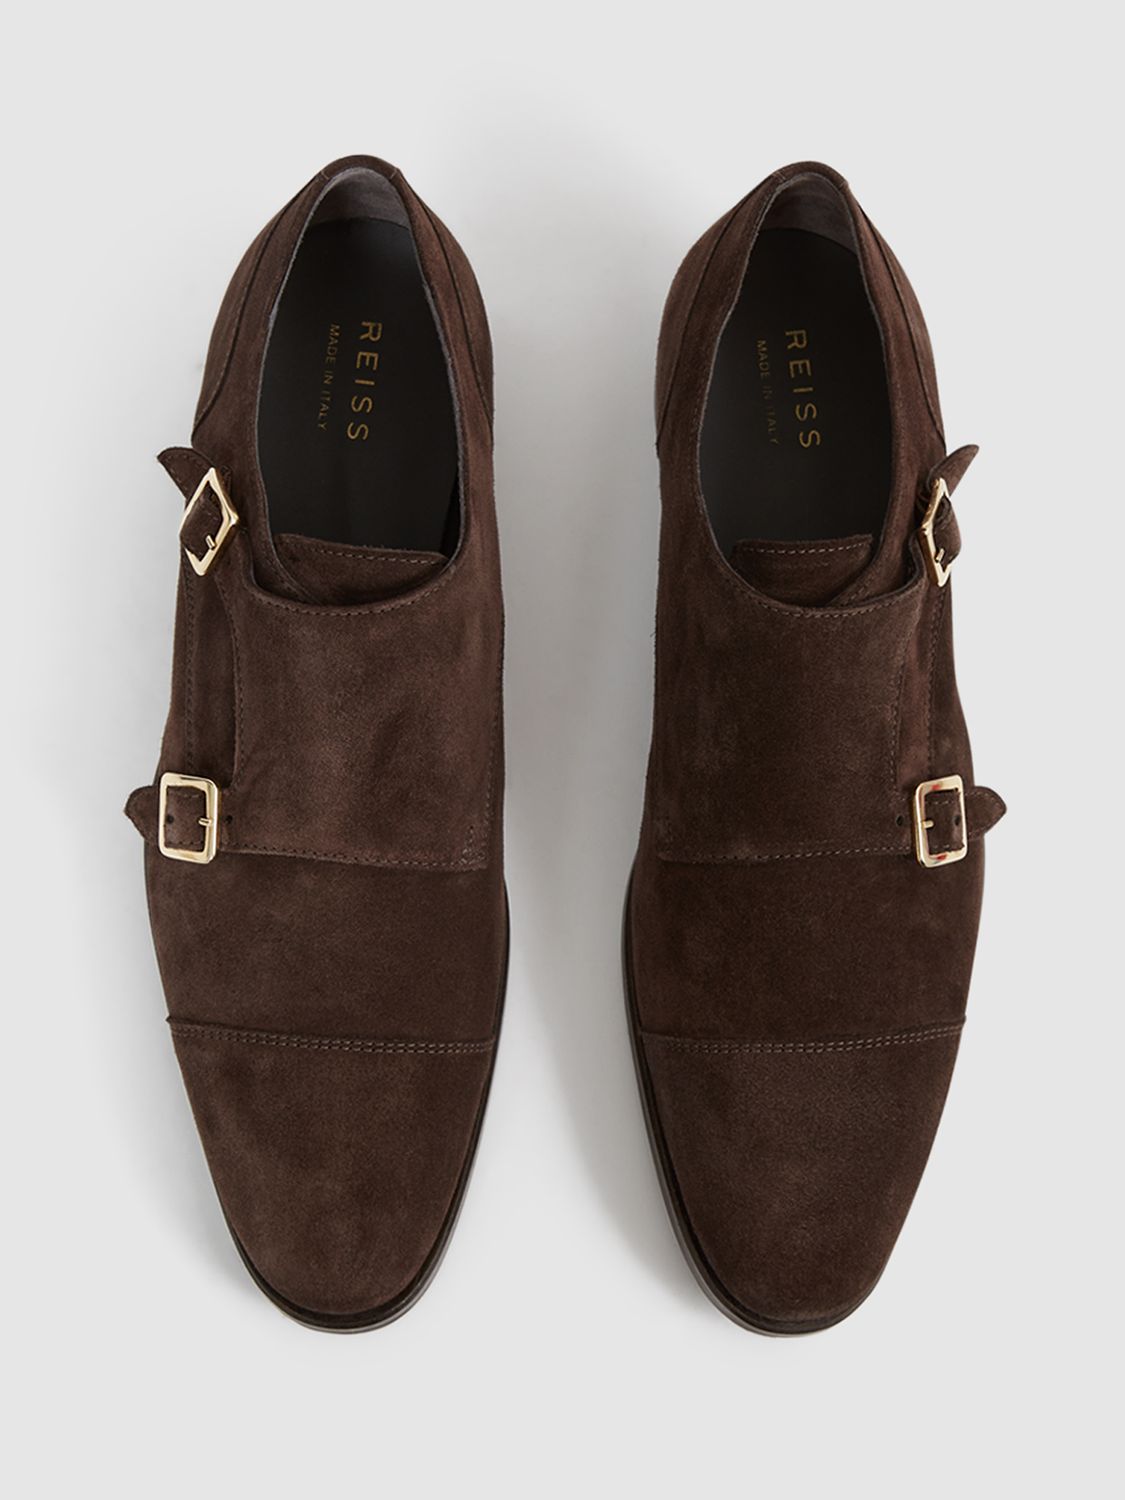 Reiss Rivington Suede Leather Monk Strap Shoes, Chocolate at John Lewis ...